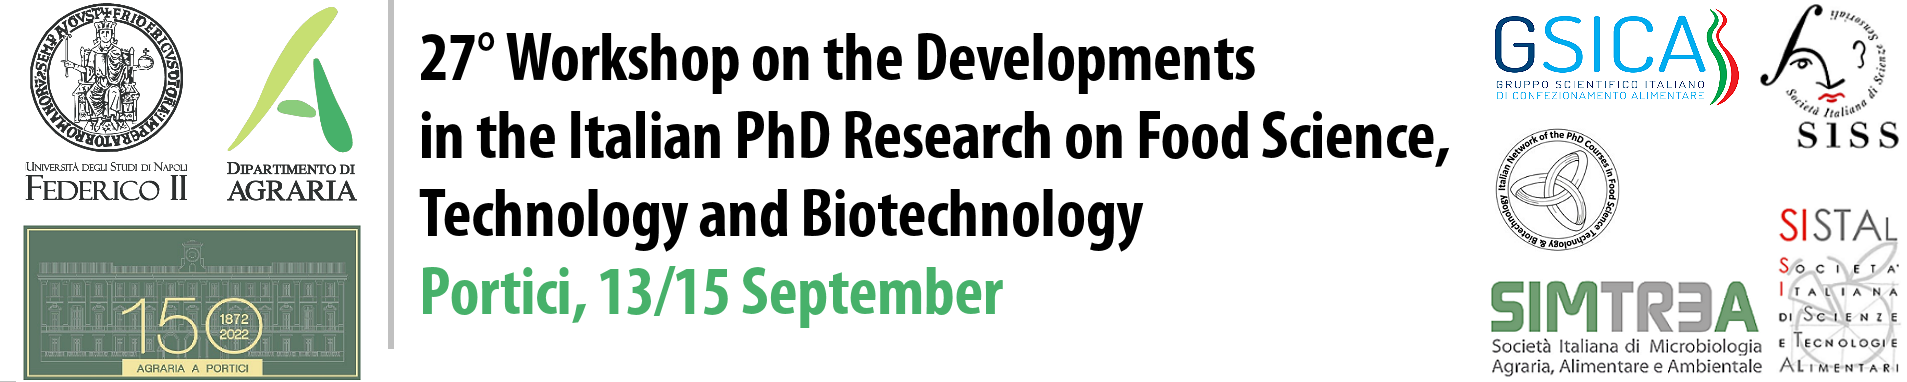 27th Workshop on the Developments in the Italian PhD Research on Food Science Technology and Biotechnology